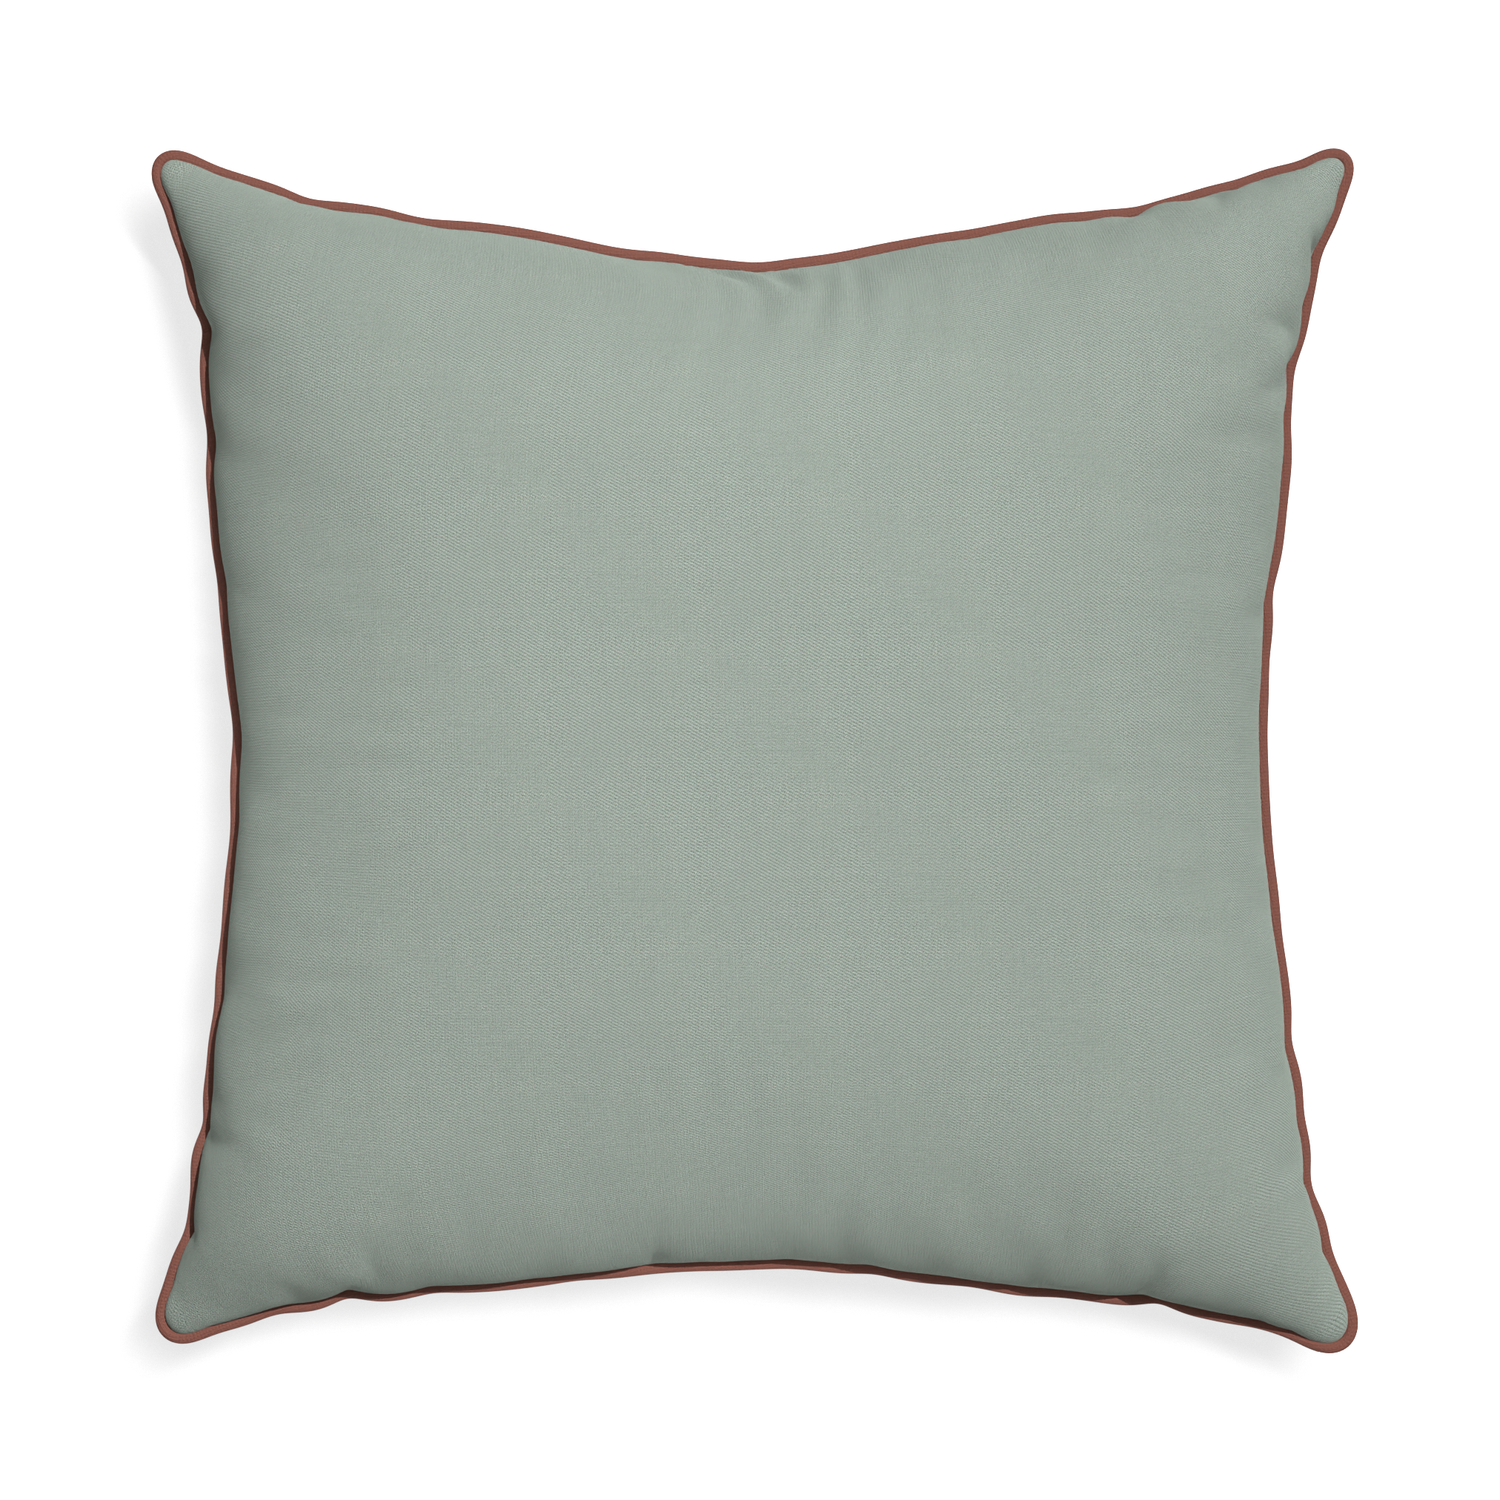 Euro-sham sage custom pillow with w piping on white background